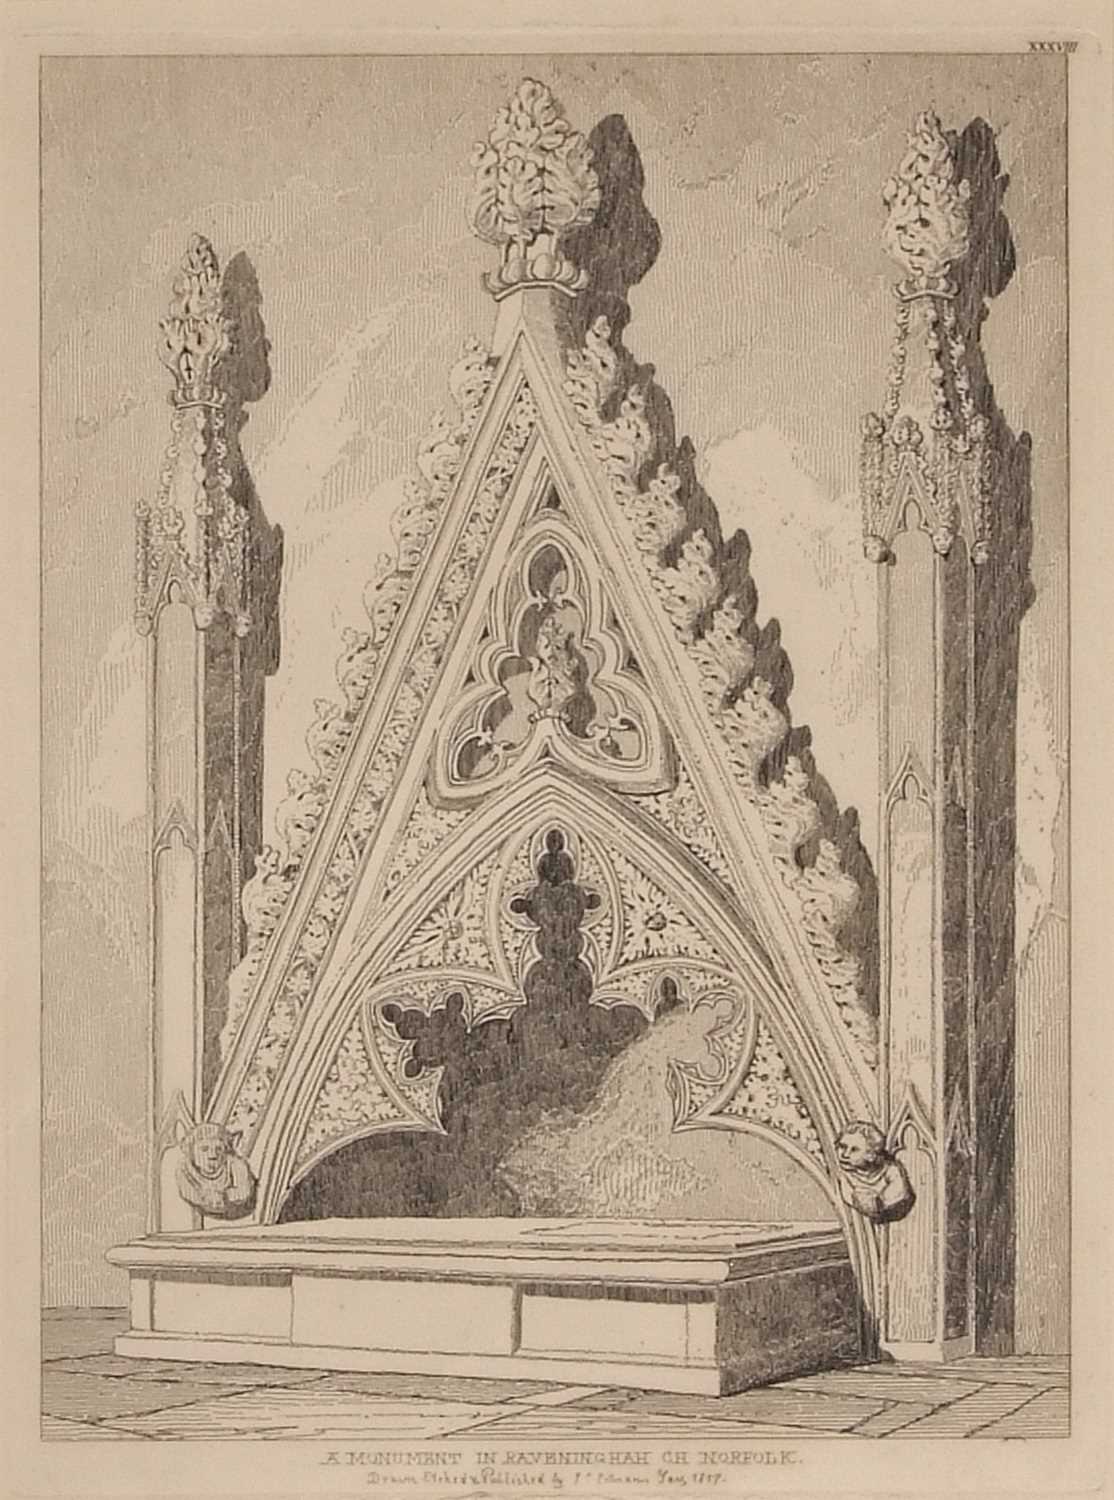 John Sell Cotman (1782-1842), 'A Monument in Raveningham Church, Norfolk', published in 'Specimens - Image 2 of 2